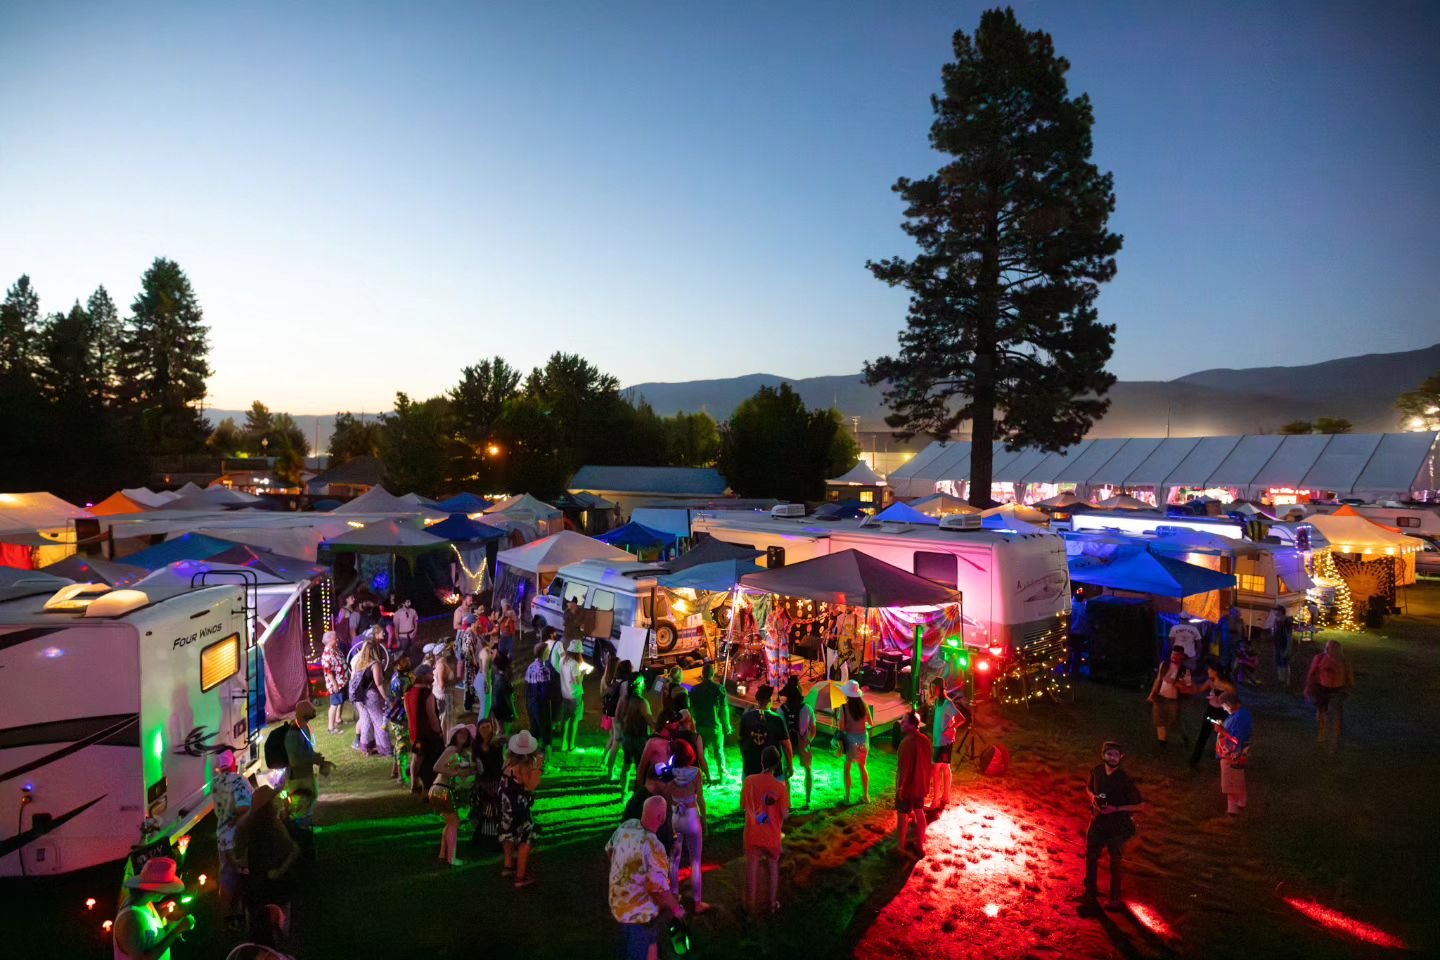 Be the life of the party at #HighSierraMusicFestival with our friends at Classic Adventures RV! Let them take care of all your RV rental needs so you don't have to worry about anything but bringing the party.

Link in story!

📷: @trevbex